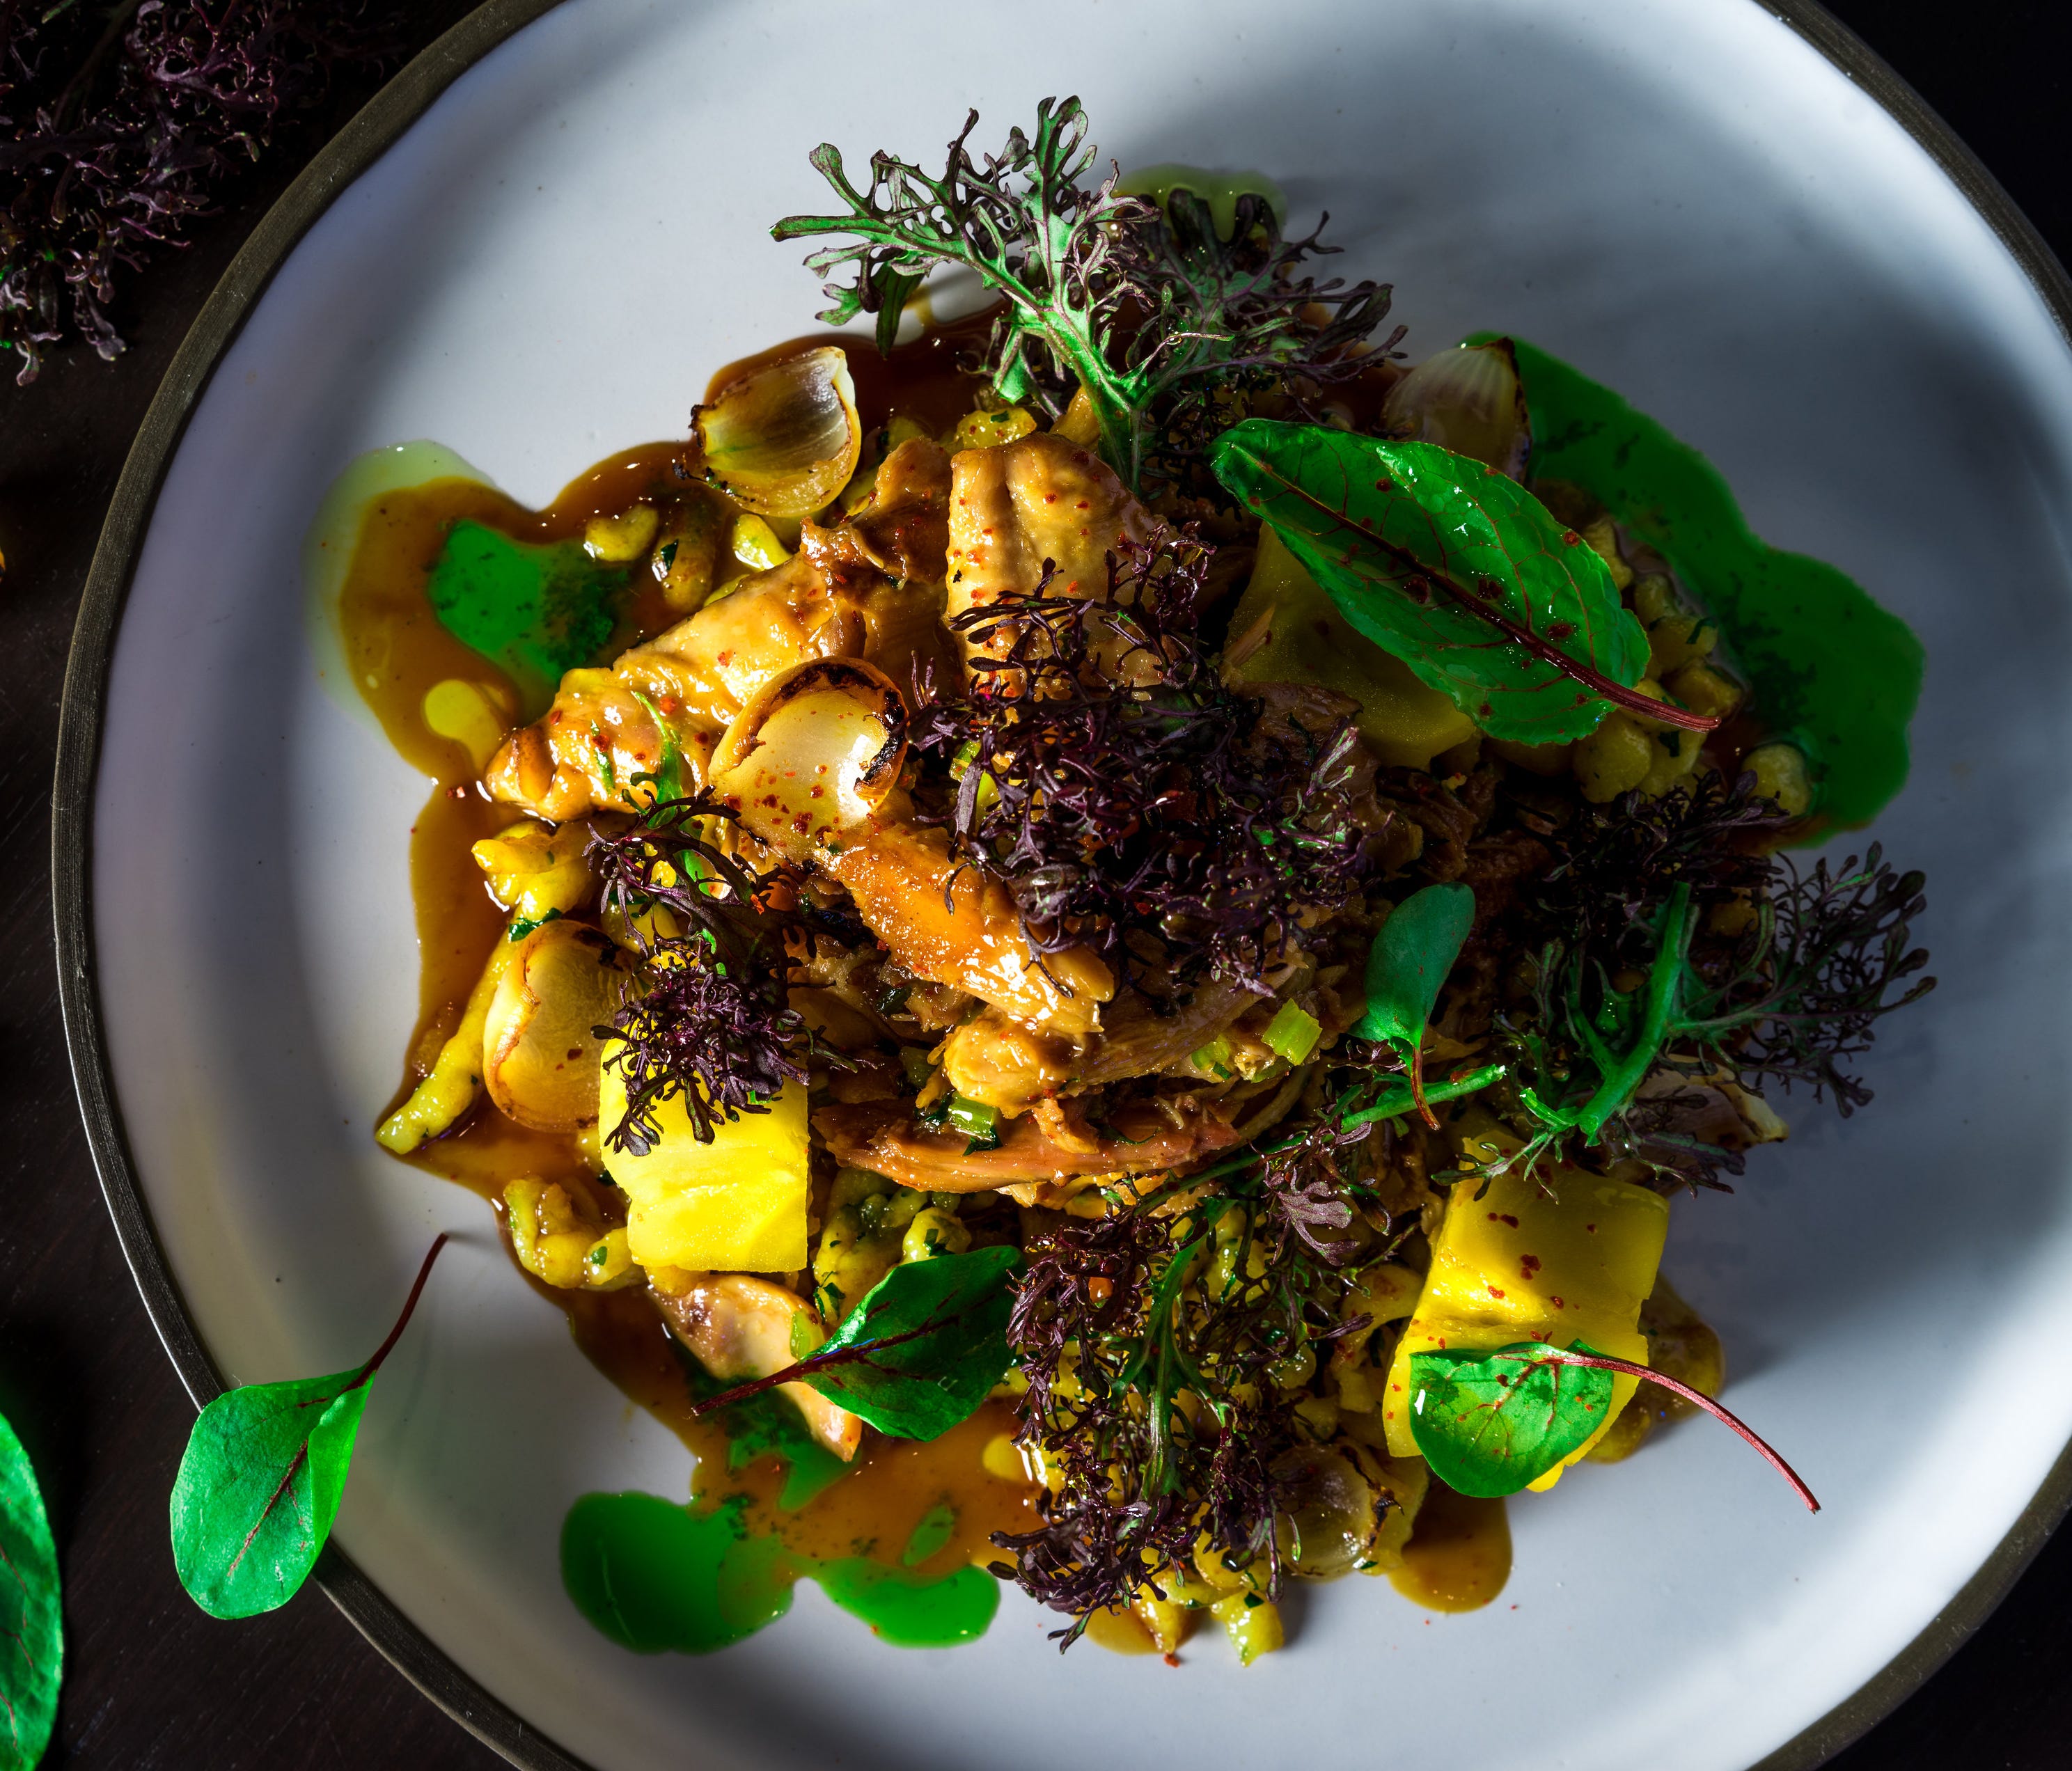 Chef Nyesha Arrington serves fresh, seasonal fare from local sources in Santa Monica, such as Rabbit Sugo with semolina, spatzle, pickled green tomato and sauce diable.